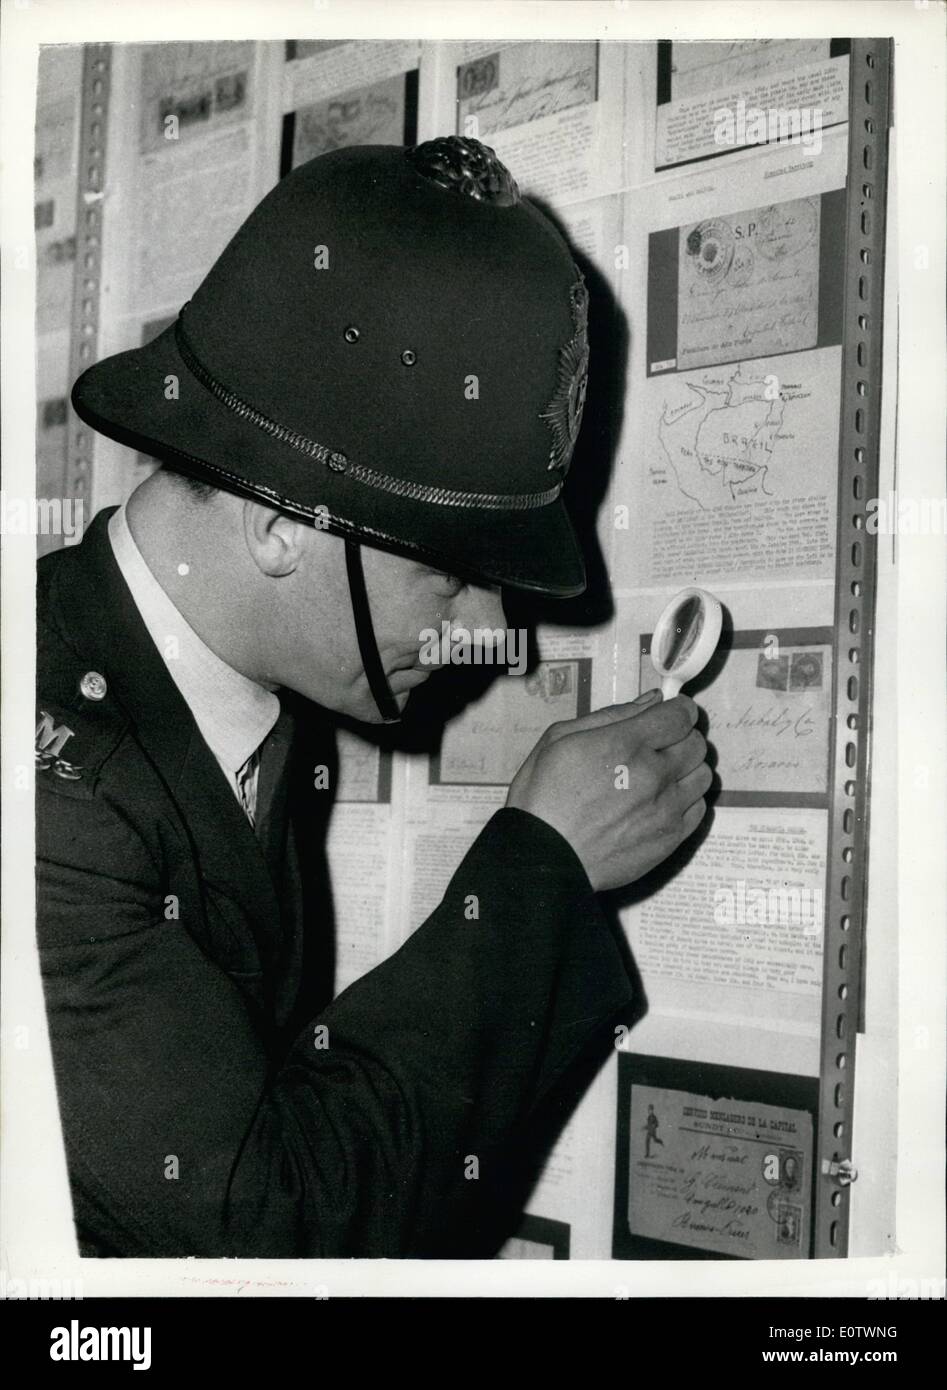 Aug. 08, 1960 - Press view of the London International Stamp Exhibition. Policeman looks at a stamp. A press view was held this Stock Photo